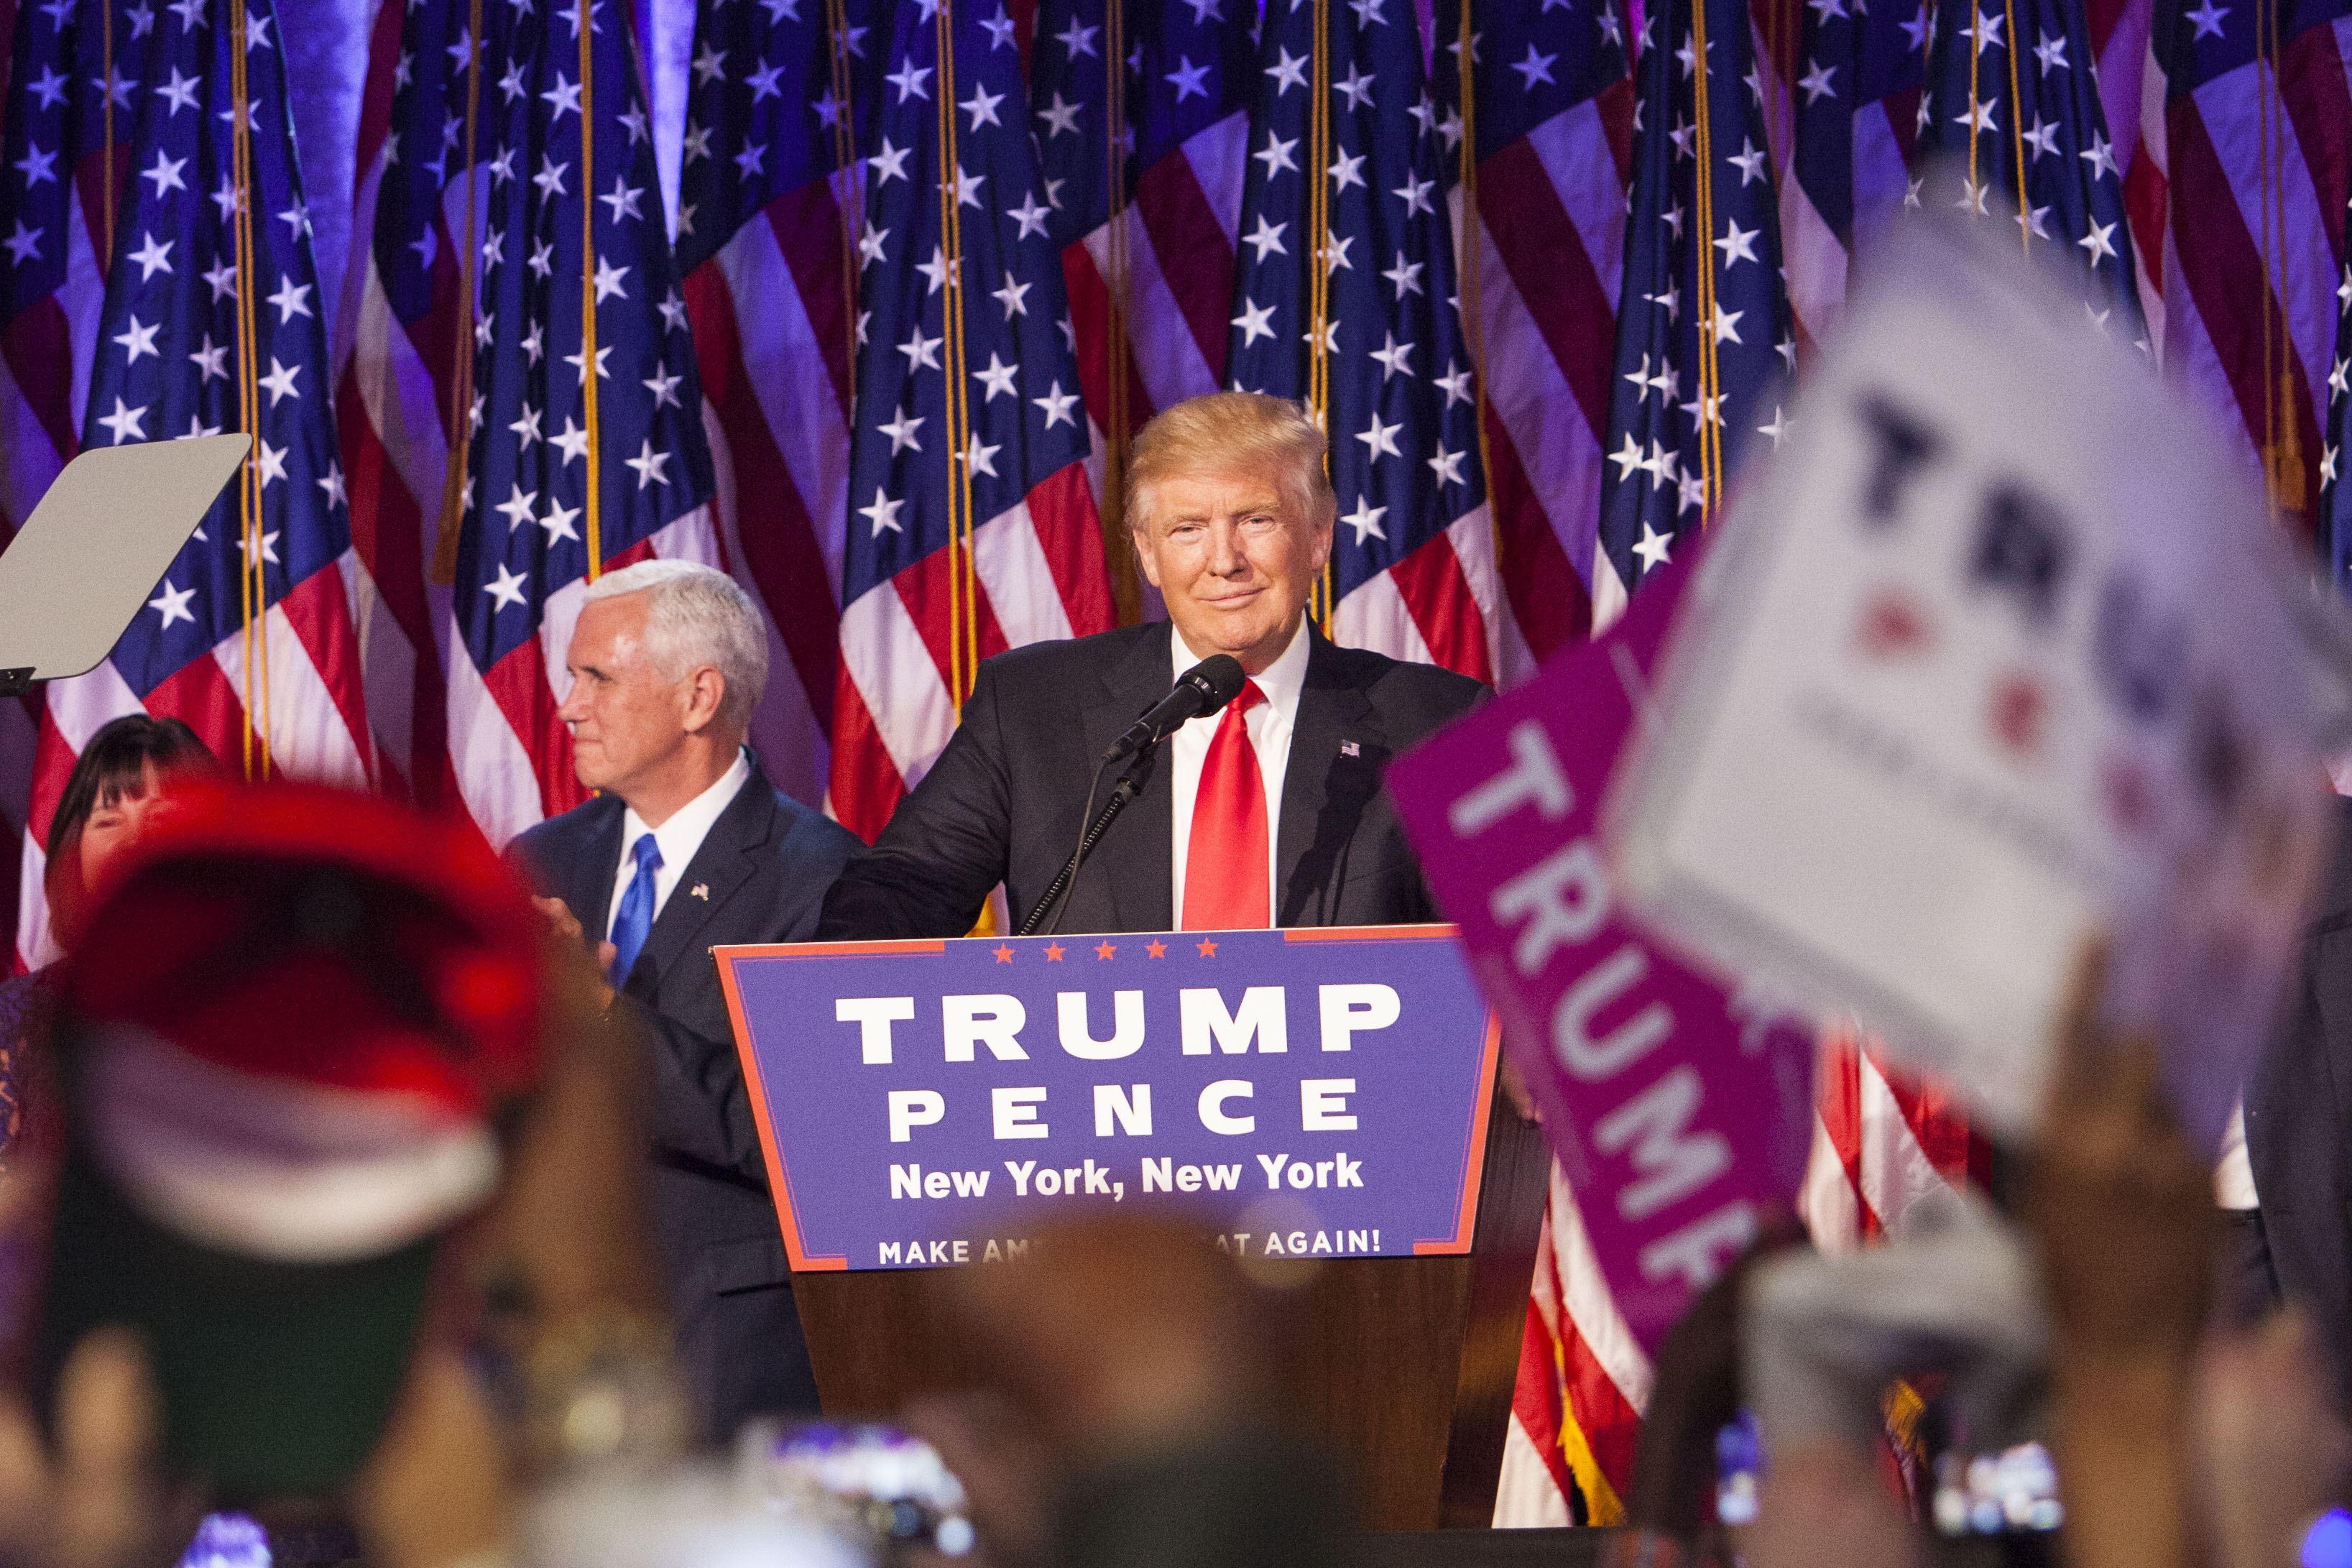 President-elect Donald Trump addresses his Victory Night party on Tuesday, Nov. 8, 2016 in New York's Manhattan borough. Trump defeated Democratic nominee Hillary Clinton in the contest for president of the United States. (Chelsea Matiash for TIME)